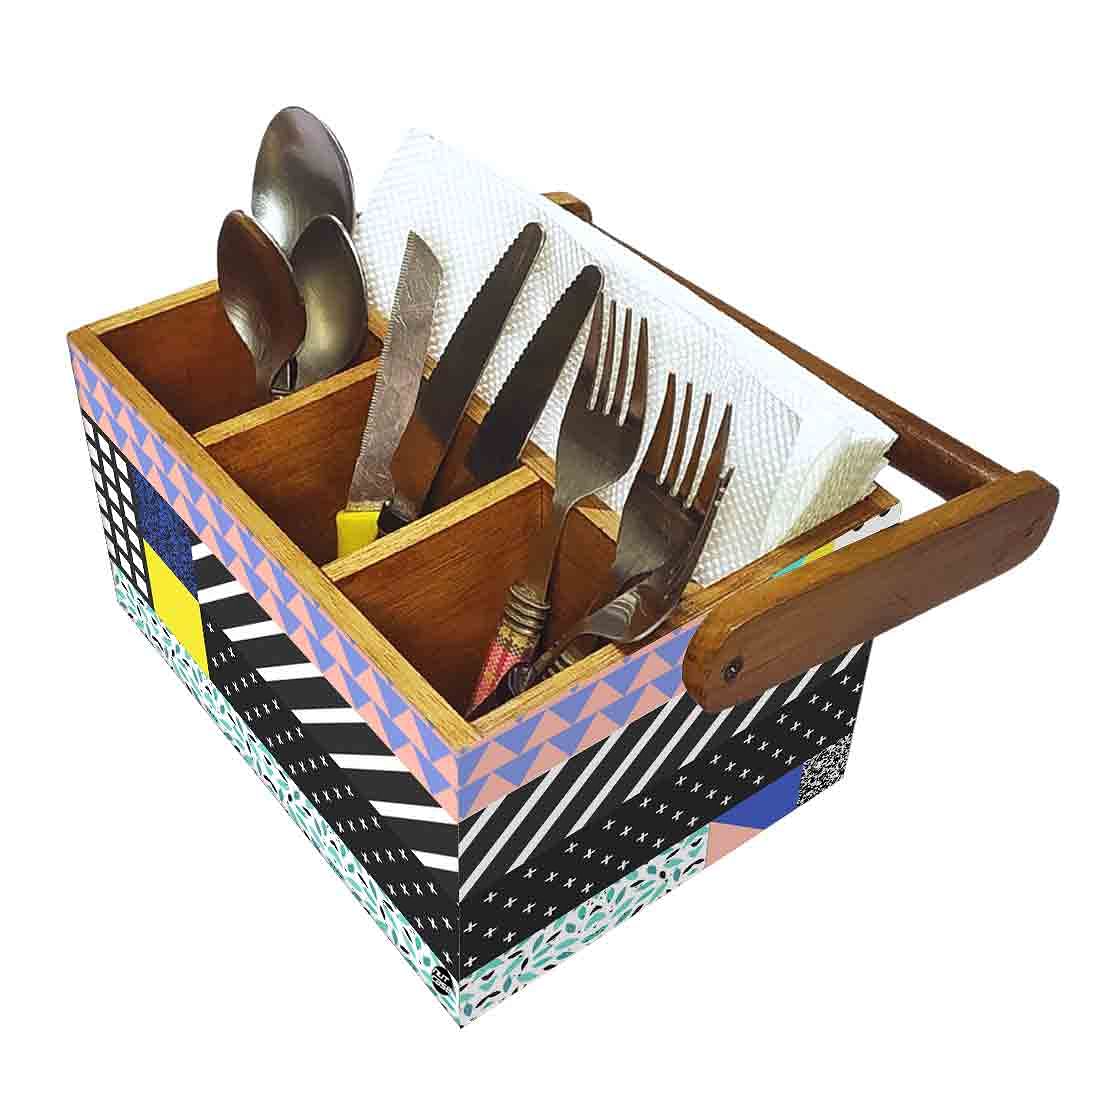 Kitchen Spoon Holder for Dining Table Organizer With Handle - Box Pattern Nutcase